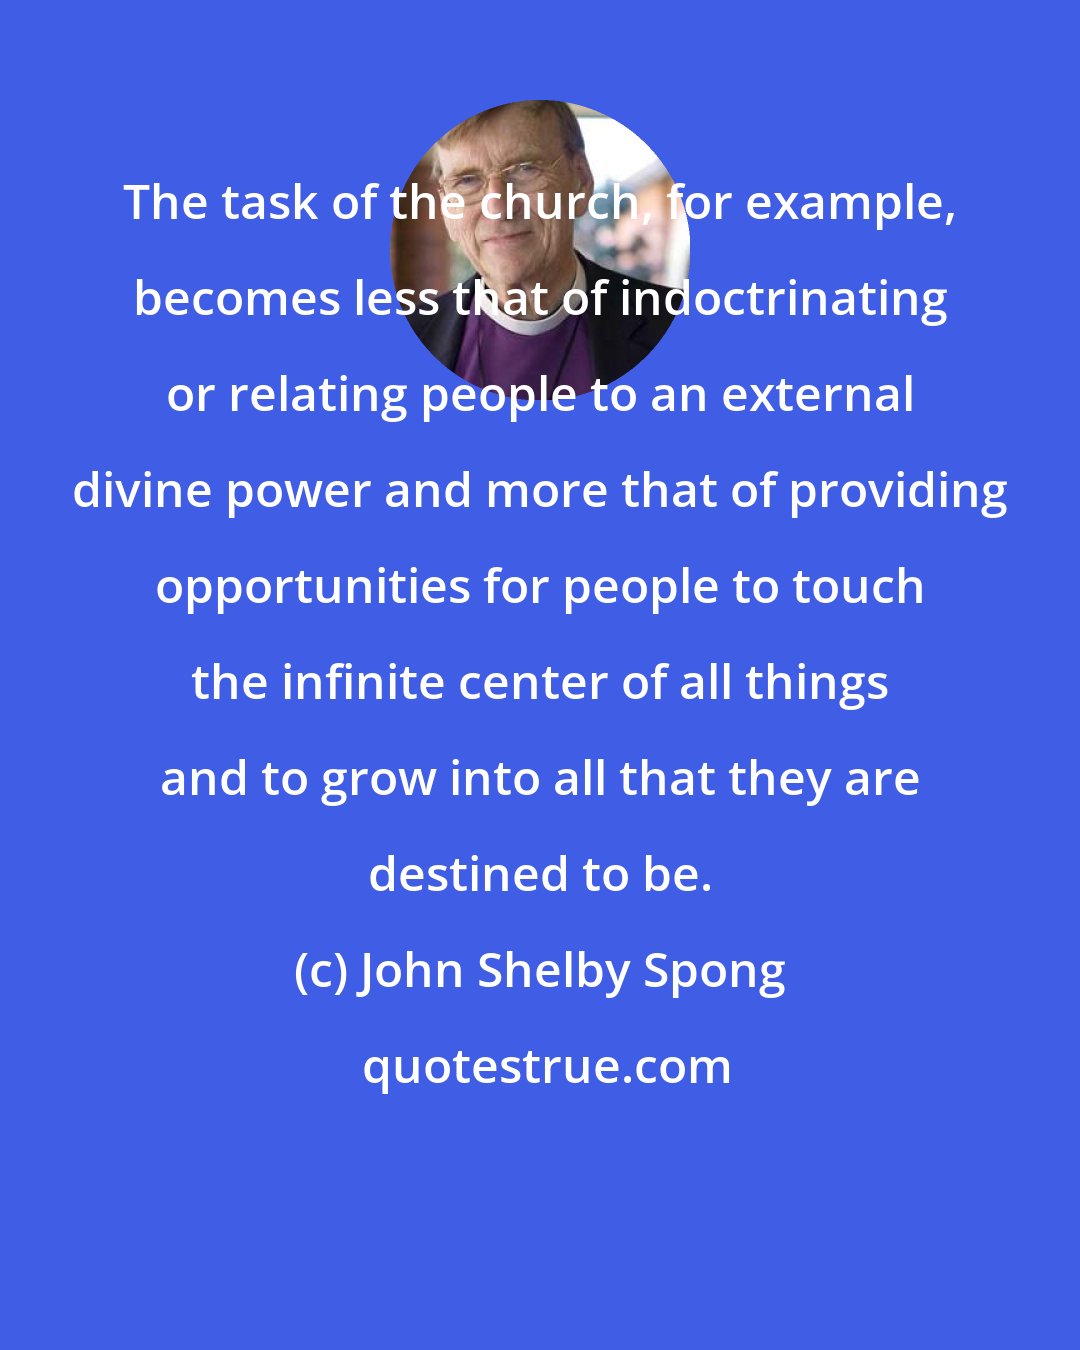 John Shelby Spong: The task of the church, for example, becomes less that of indoctrinating or relating people to an external divine power and more that of providing opportunities for people to touch the infinite center of all things and to grow into all that they are destined to be.